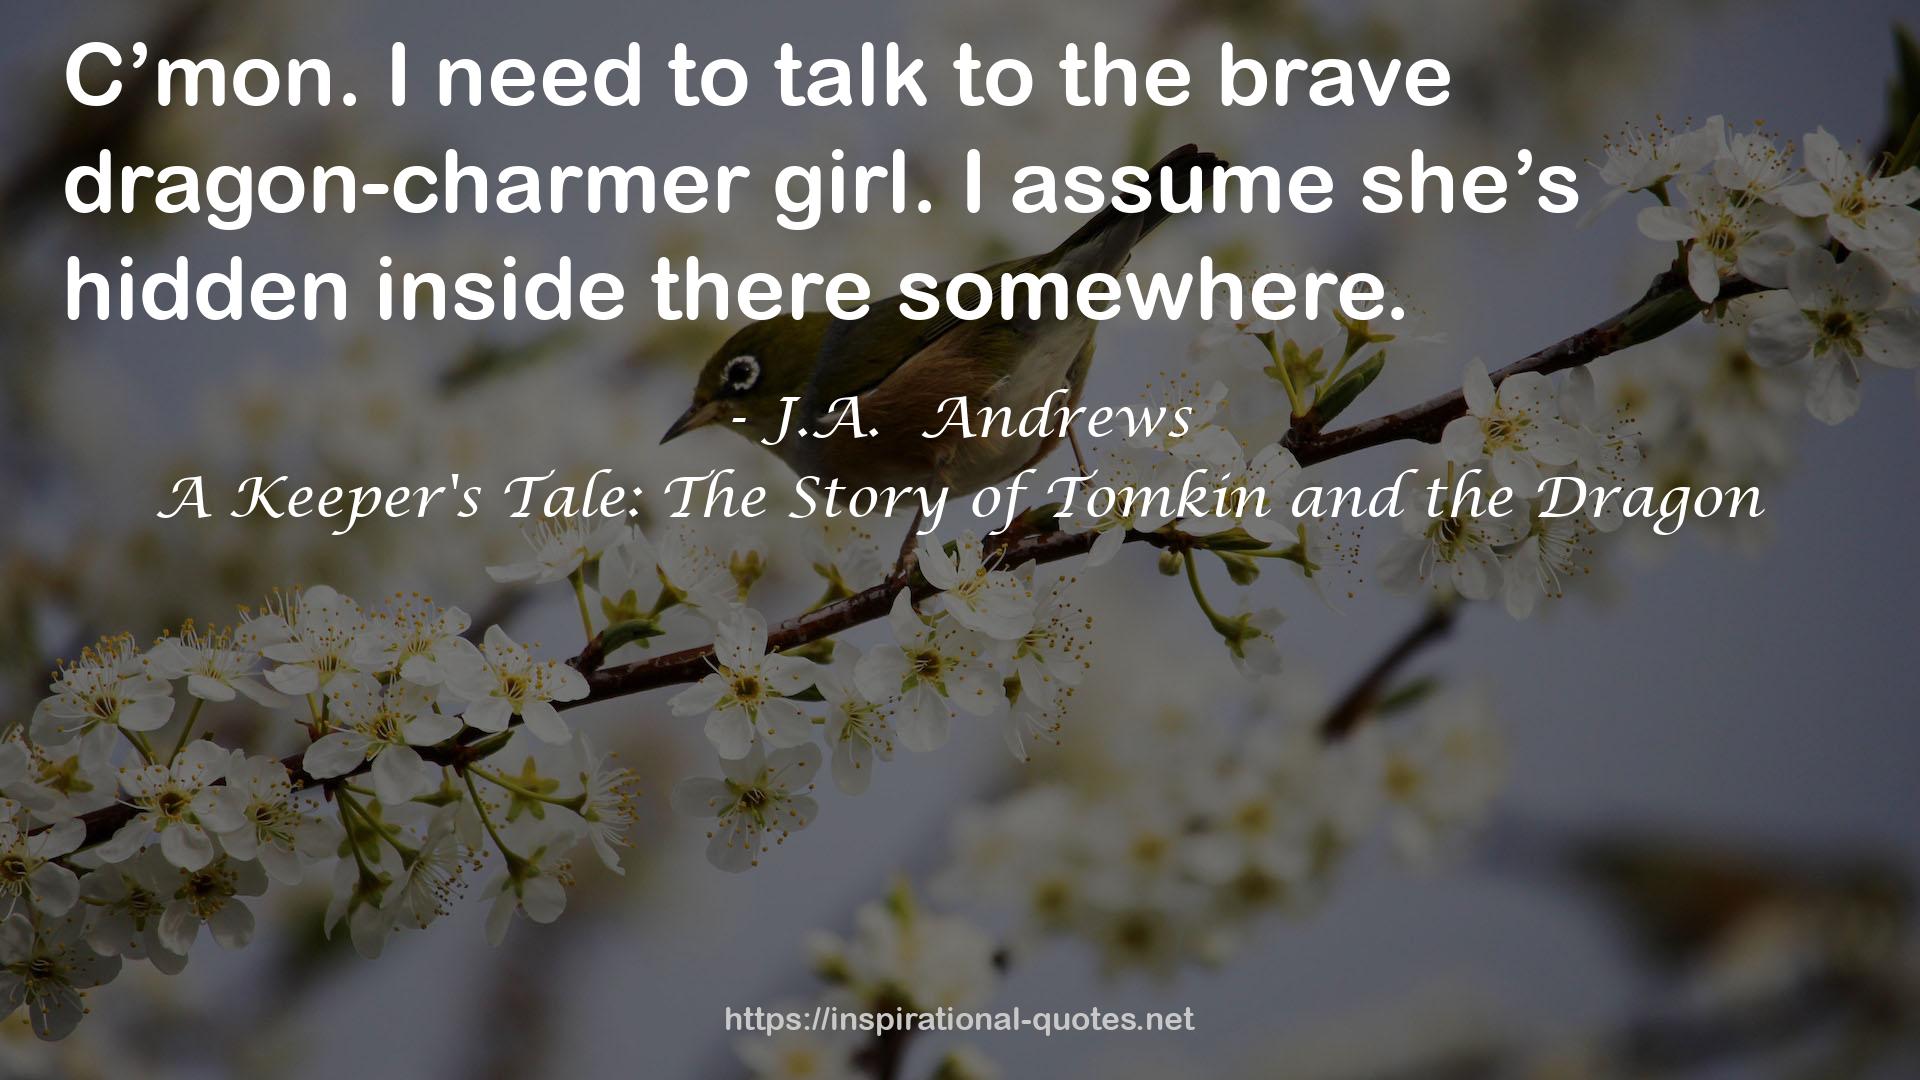 A Keeper's Tale: The Story of Tomkin and the Dragon QUOTES